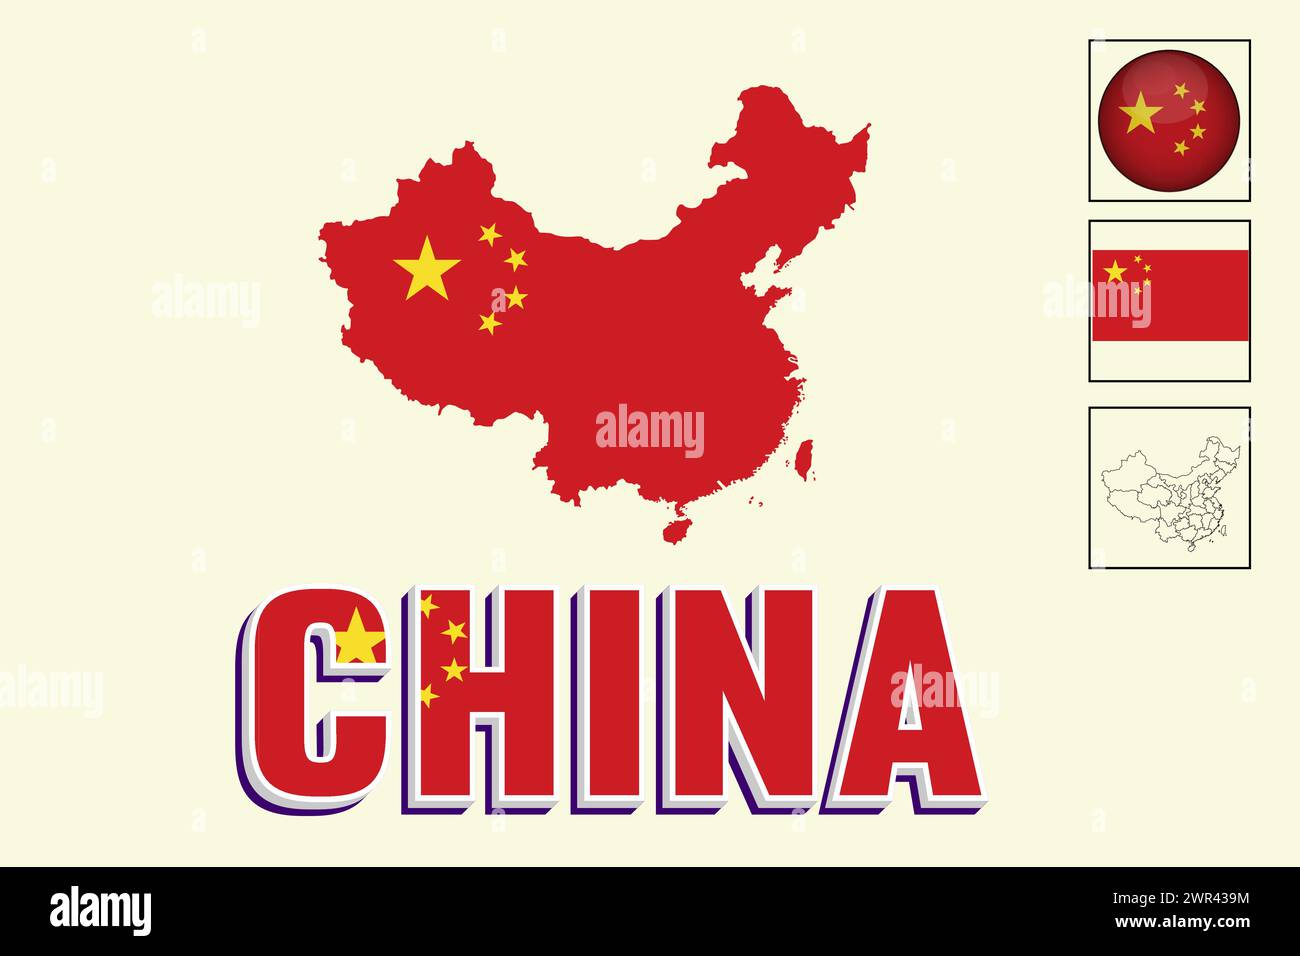 China flag and map in vector illustration Stock Vector